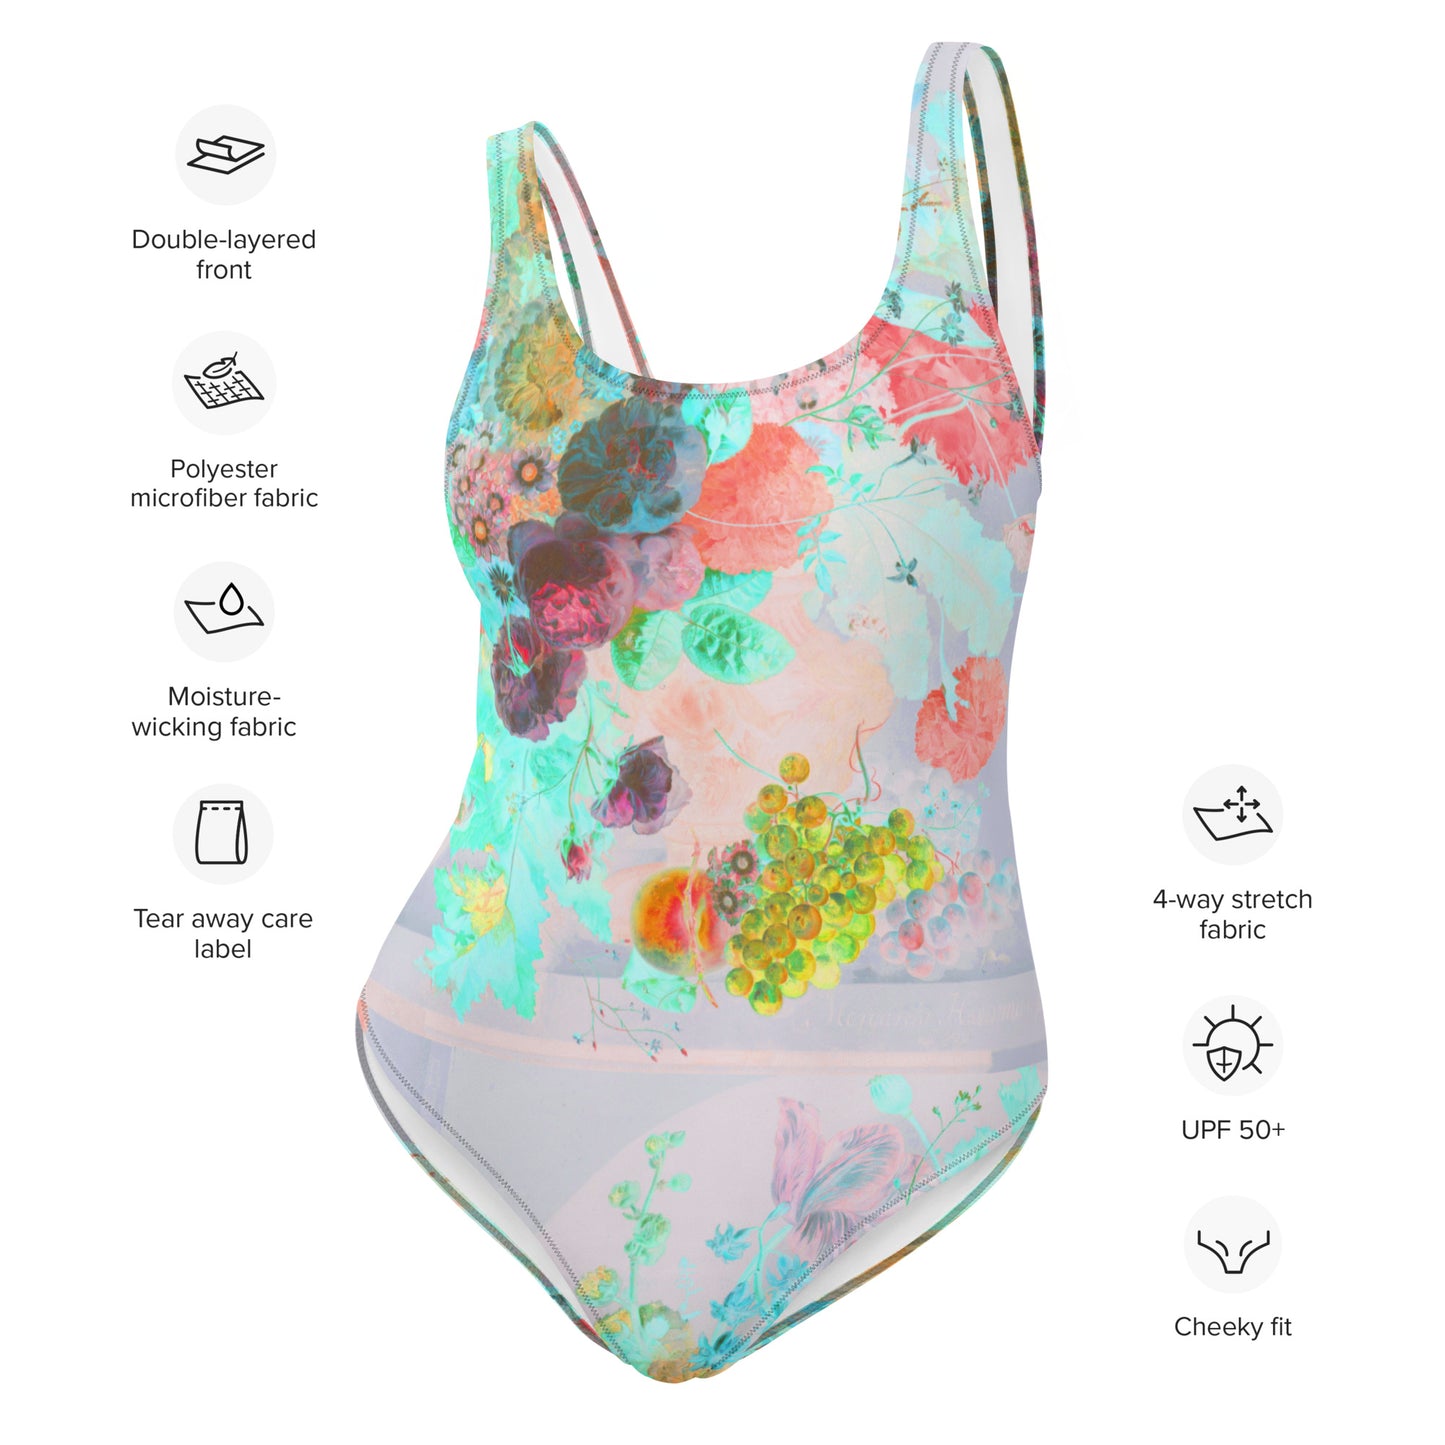 Peaches & Grapes Floral One-Piece Swimsuit